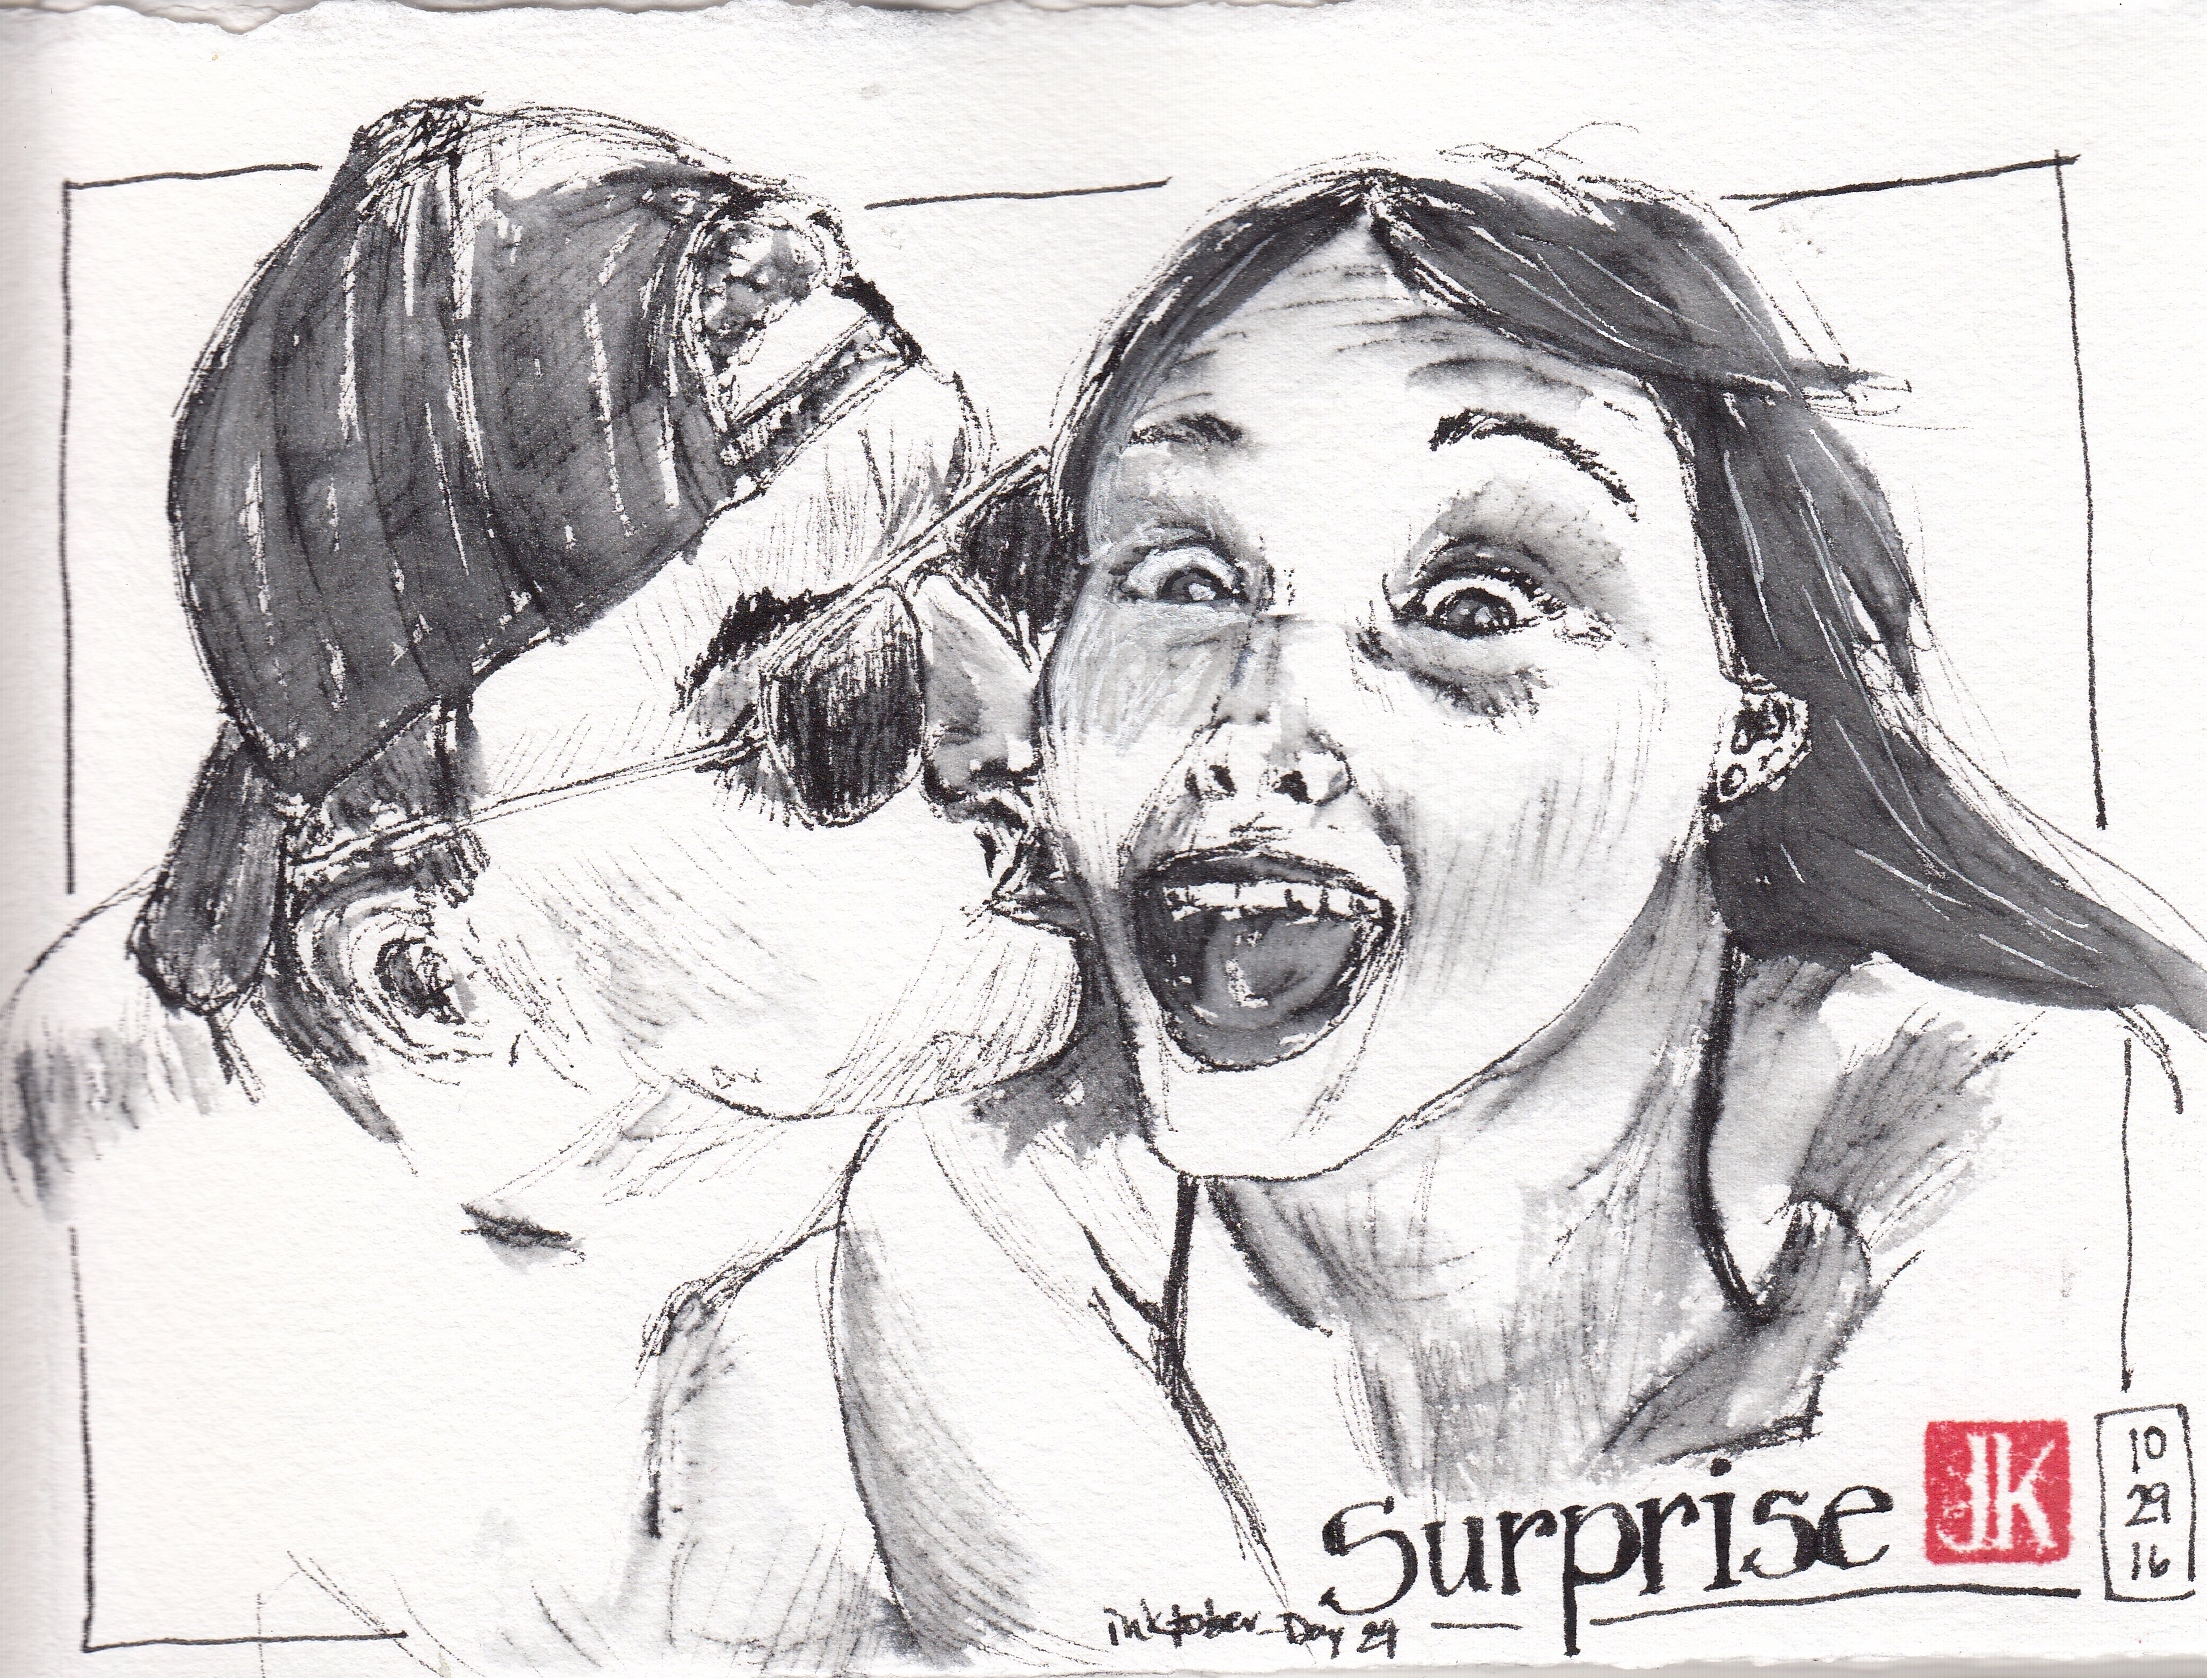 Day 29 - Surprise